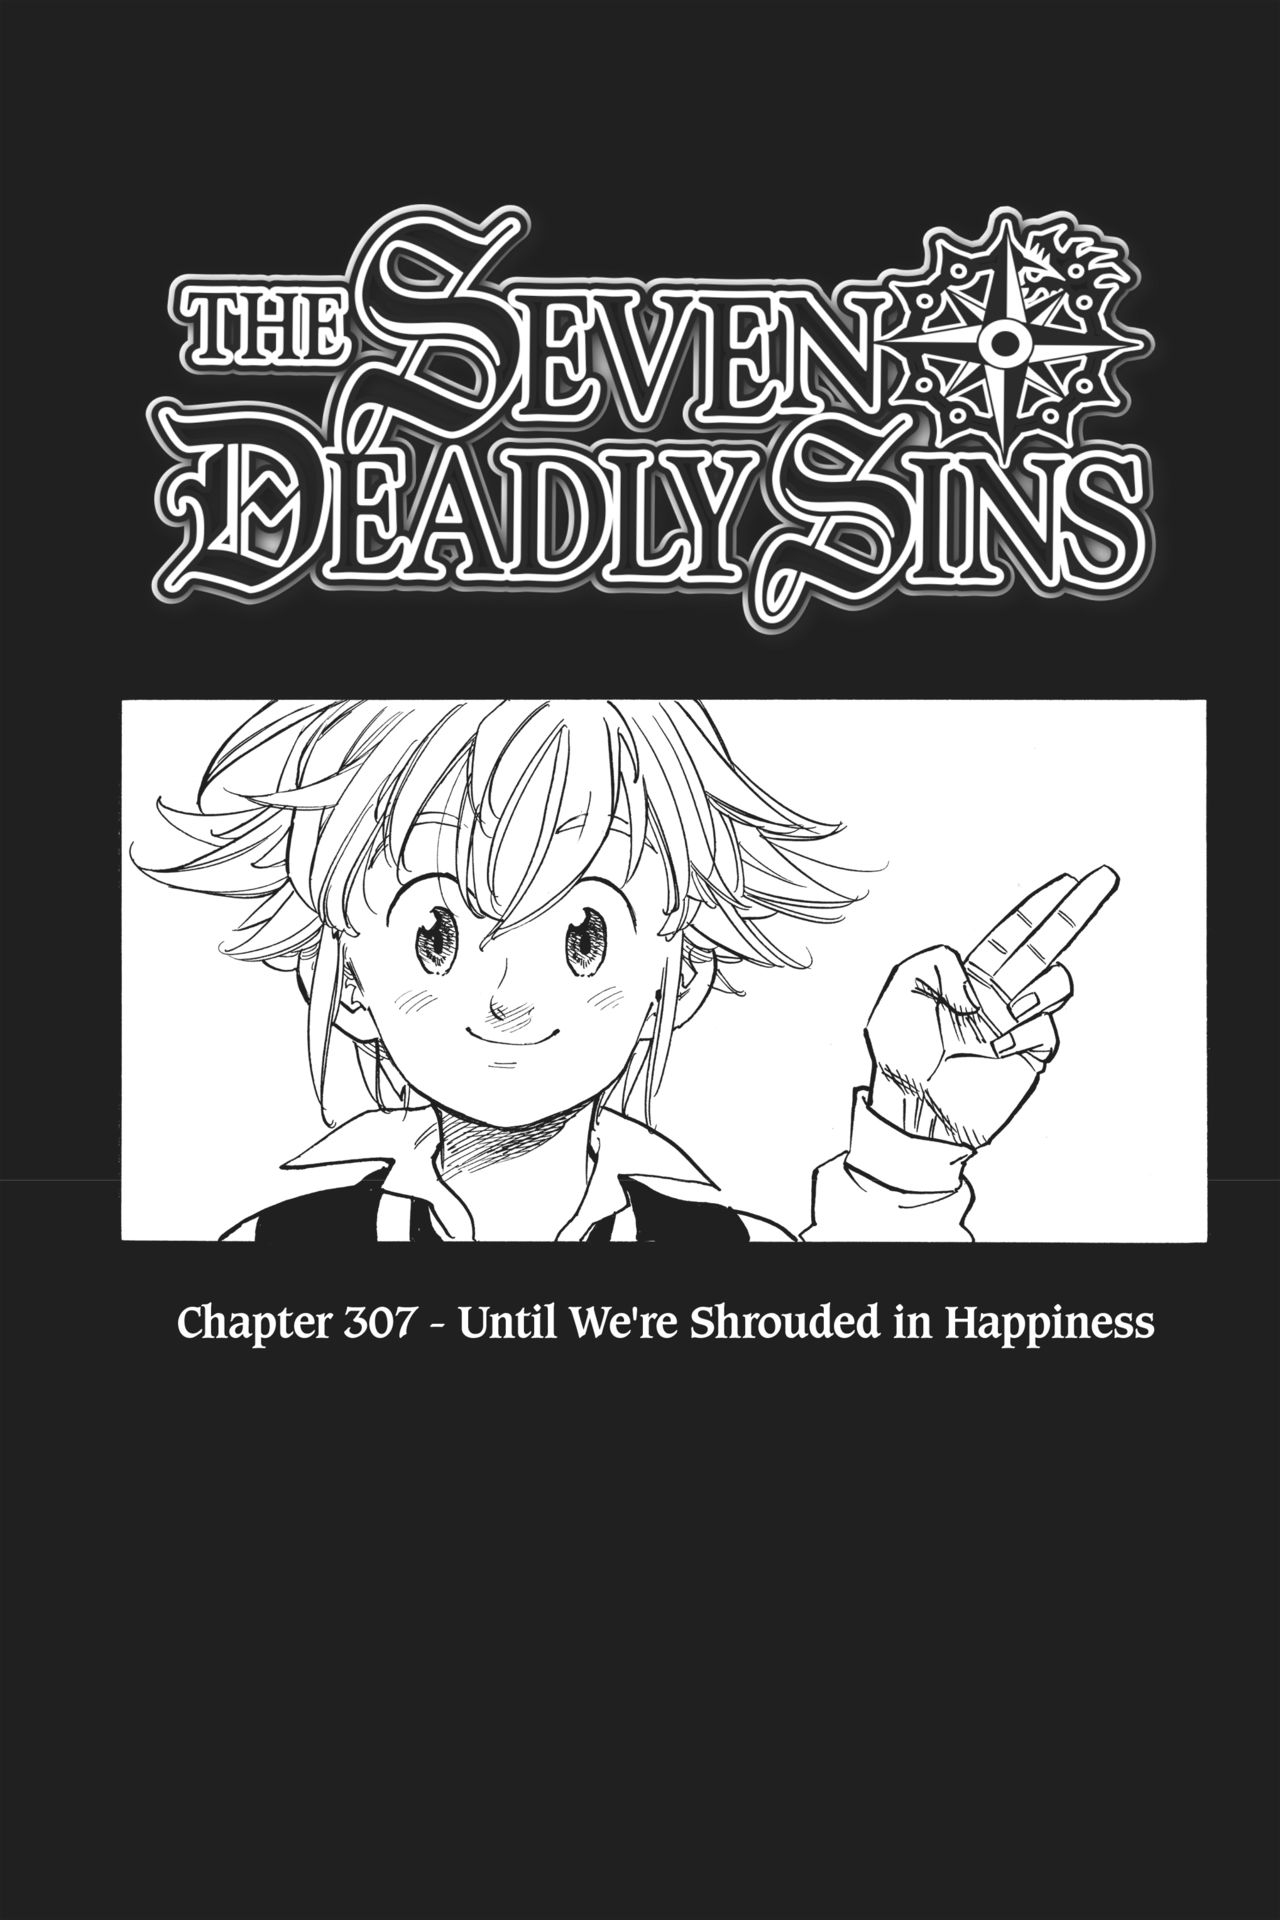 The Seven Deadly Sins (Covers & Chapter Title Cards) 237